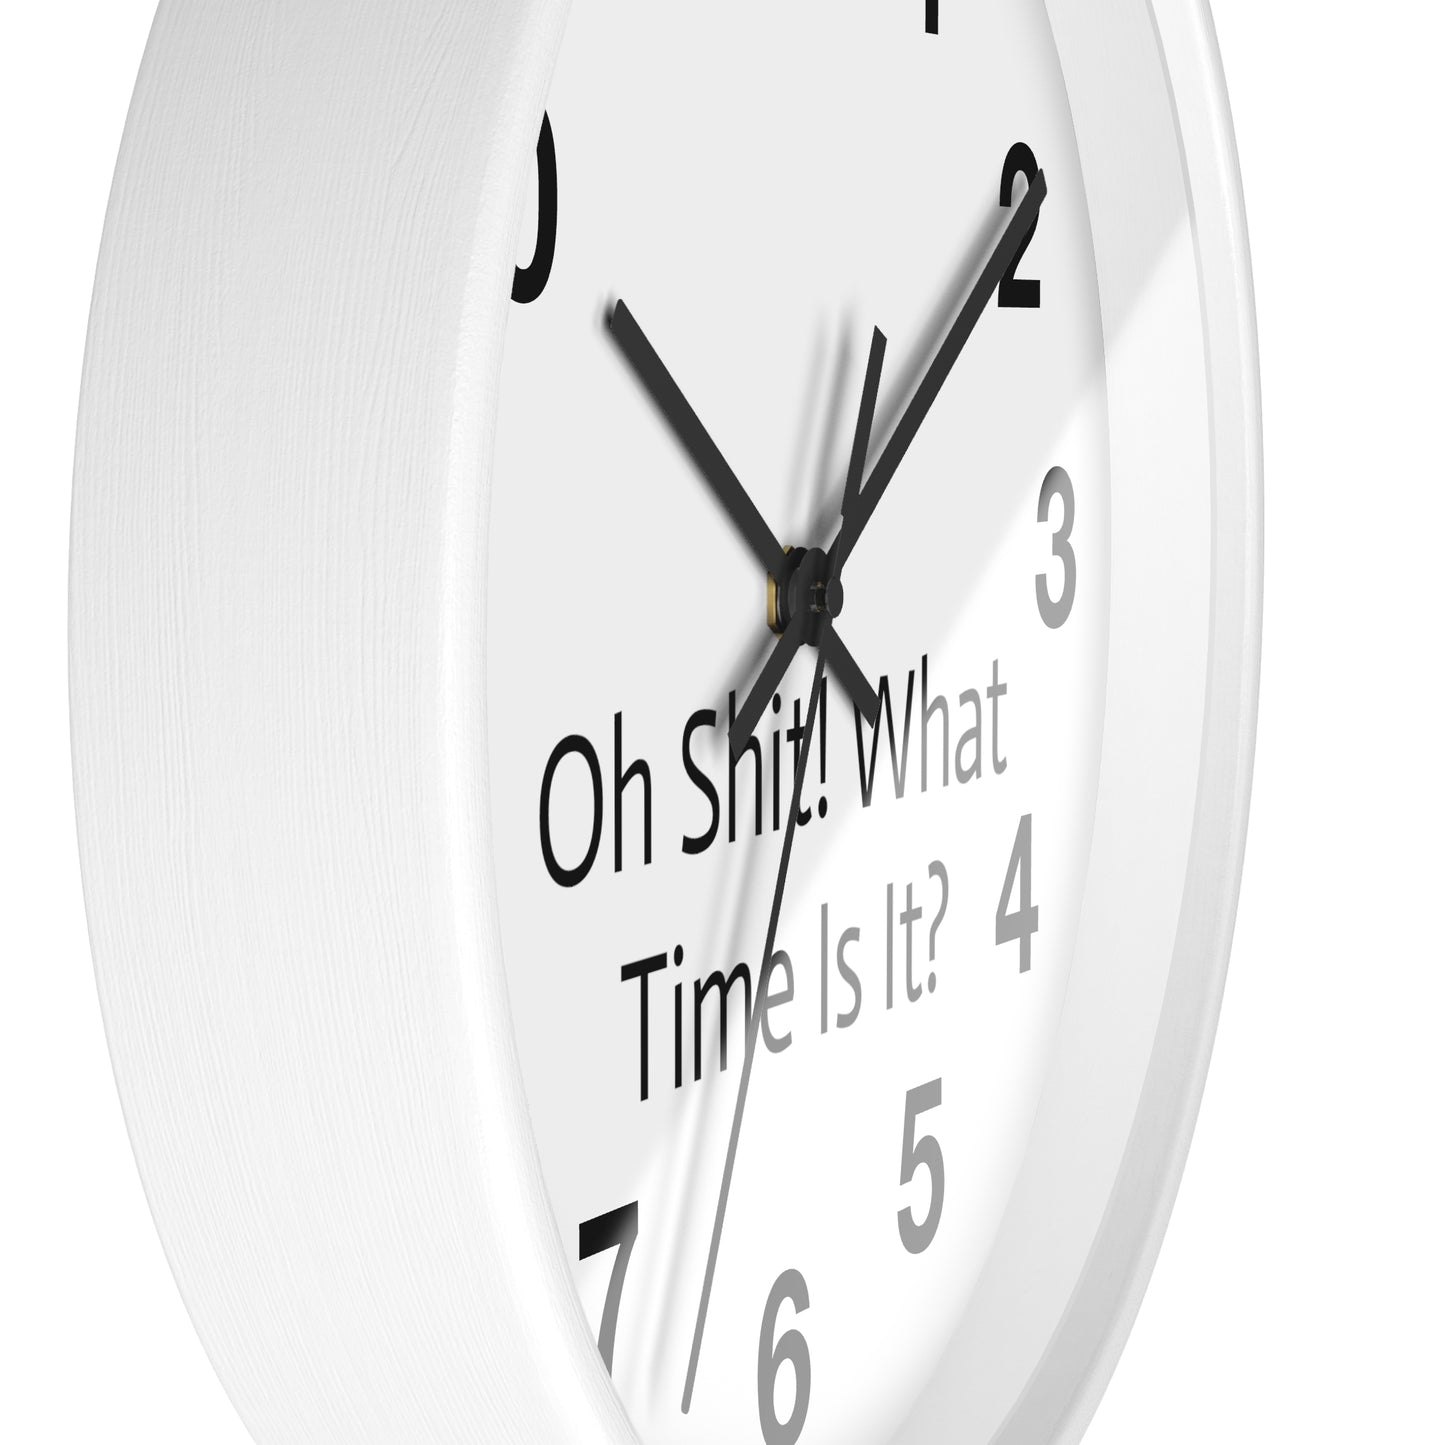 "Oh Shit! What Time Is It?" Wall Clock: Humor Meets Timekeeping